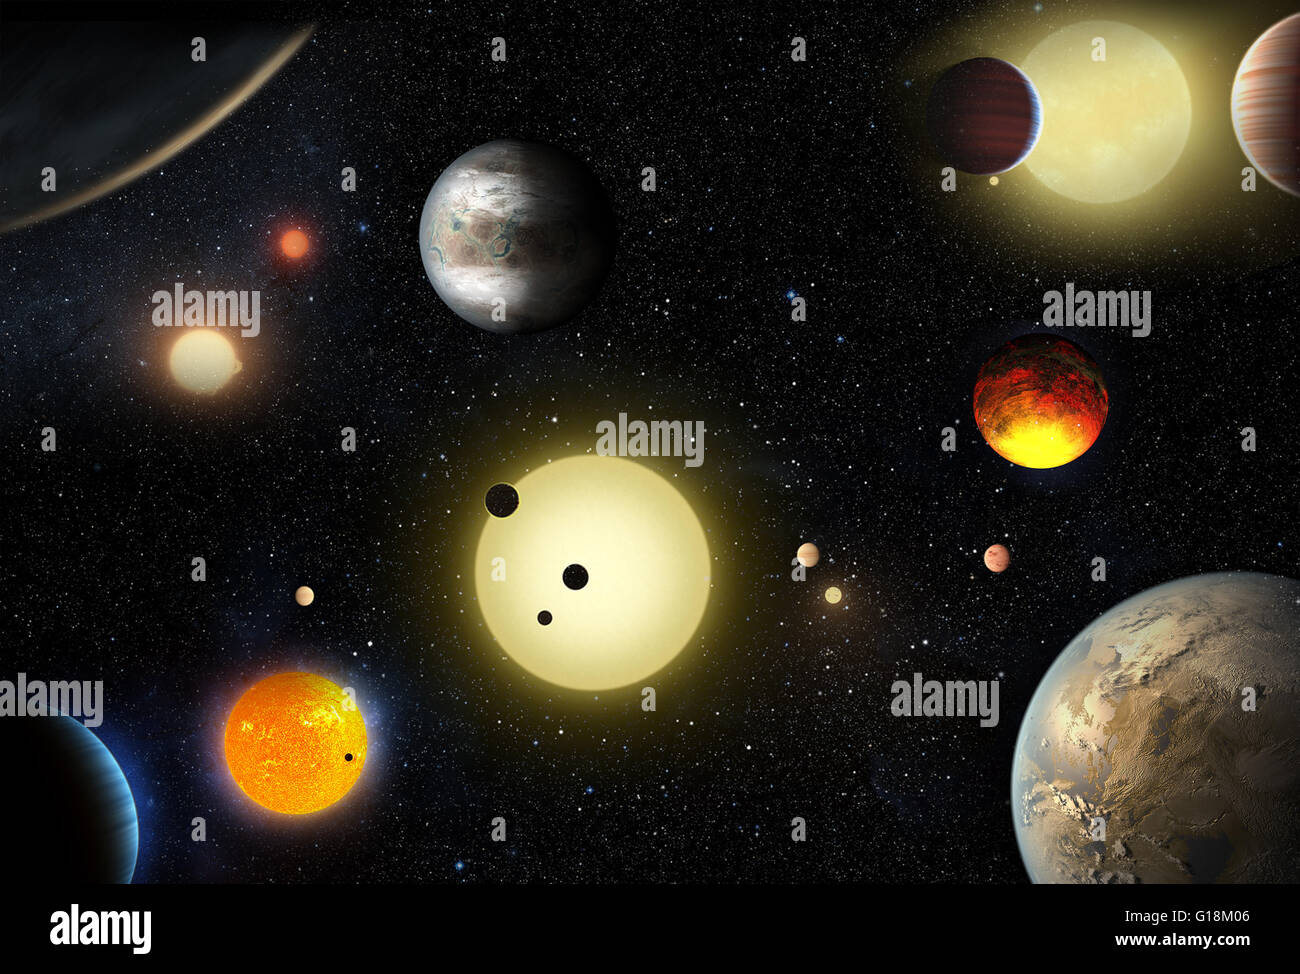 Washington, DC, USA. 11th May, 2016. This artist's concept obtained from U.S. space agency NASA depicts select planetary discoveries made to date by NASA's Kepler space telescope. NASA said Tuesday its Kepler mission has verified the existence of nearly 1,300 new planets, almost doubling the number of known planets outside our solar system. Credit:  NASA/W. Stenzel/Xinhua/Alamy Live News Stock Photo